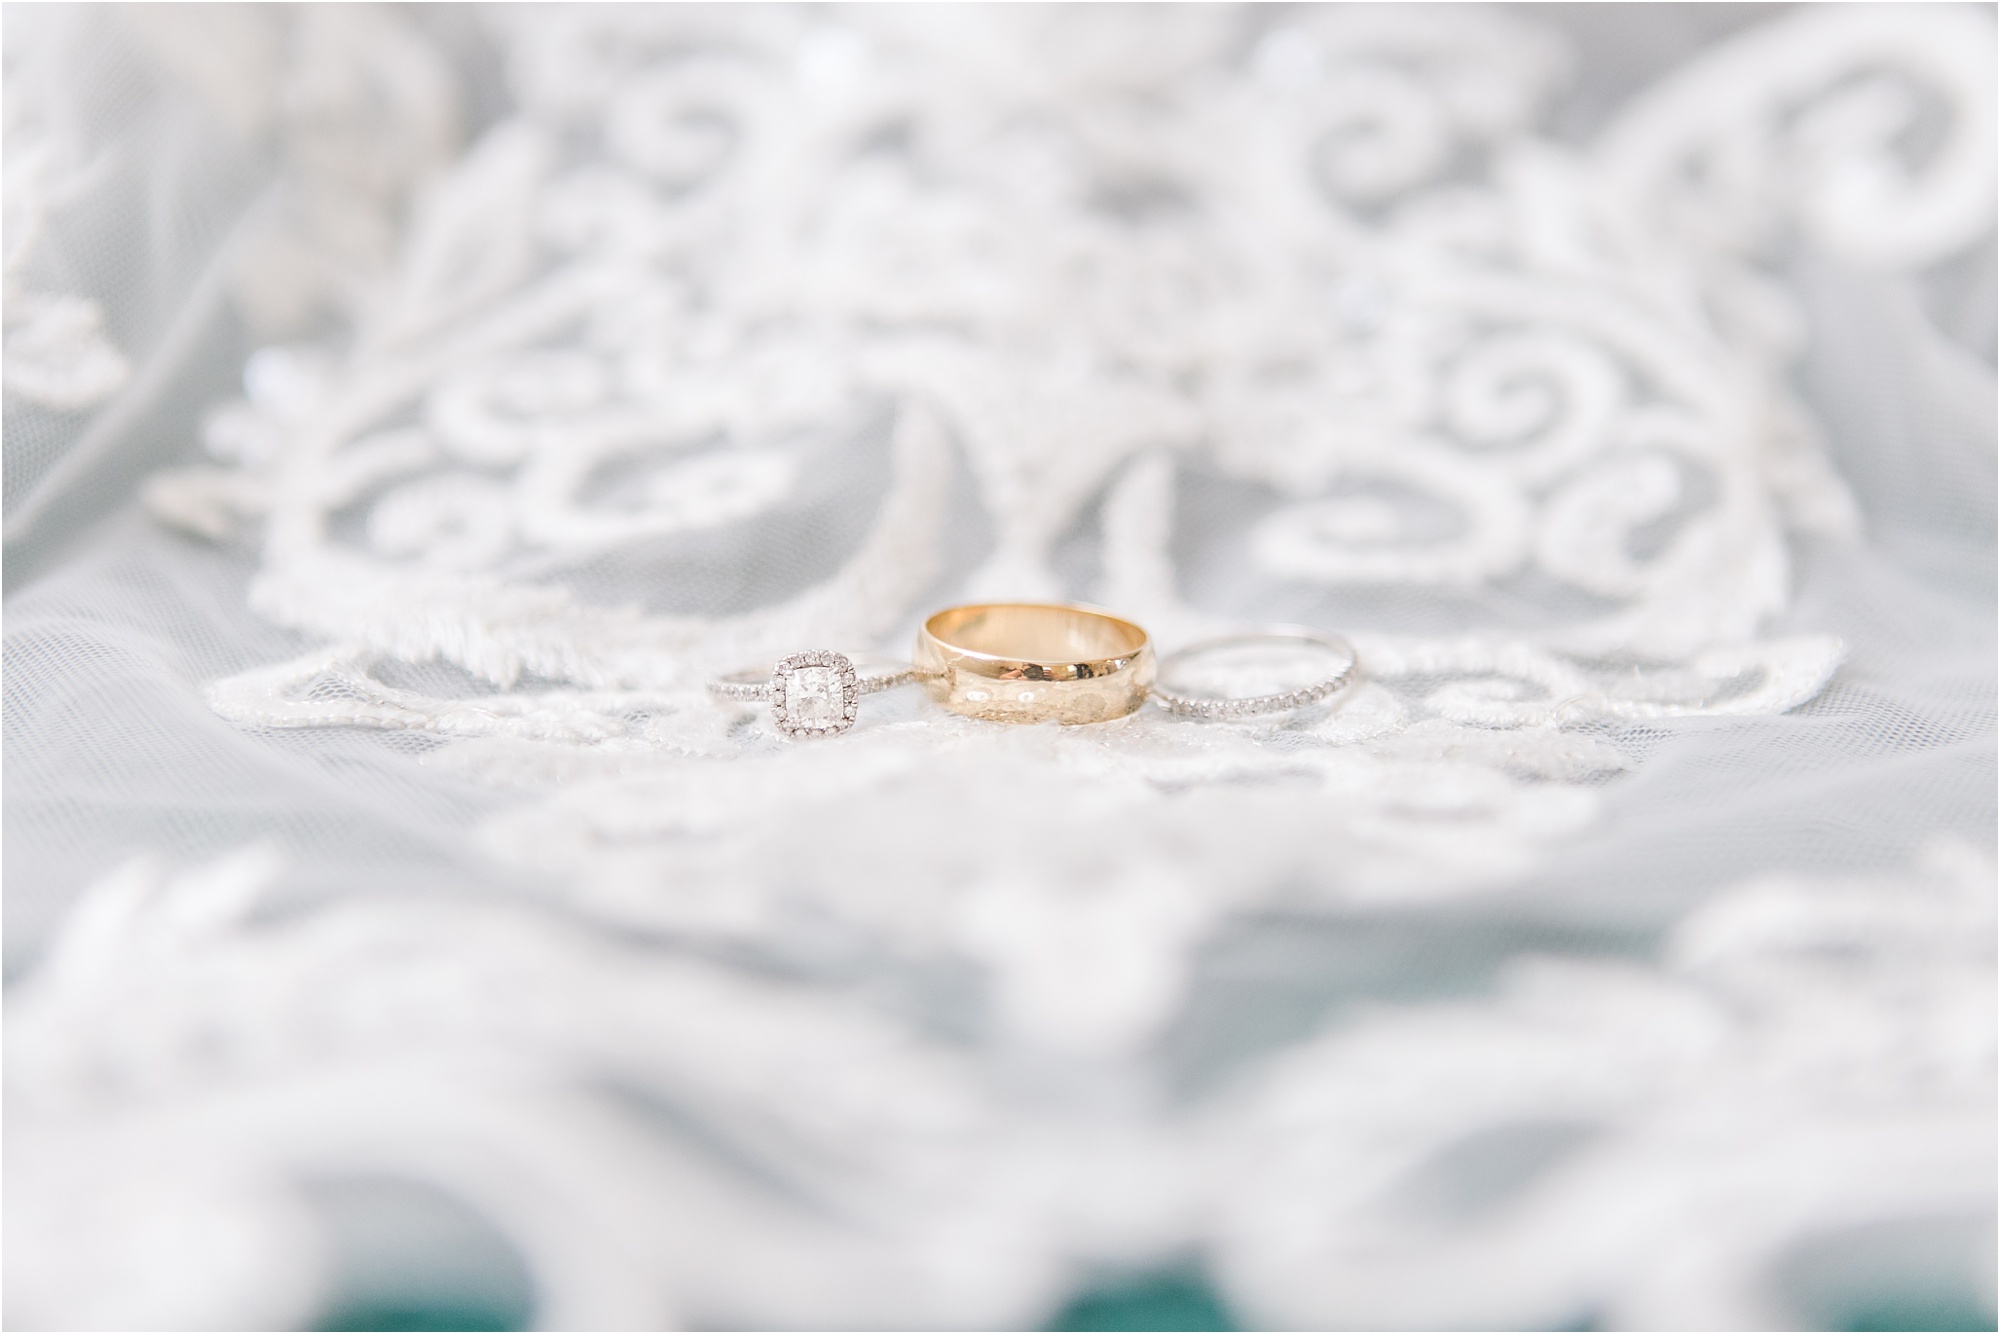 macon wedding bands and engagement ring on lace dress